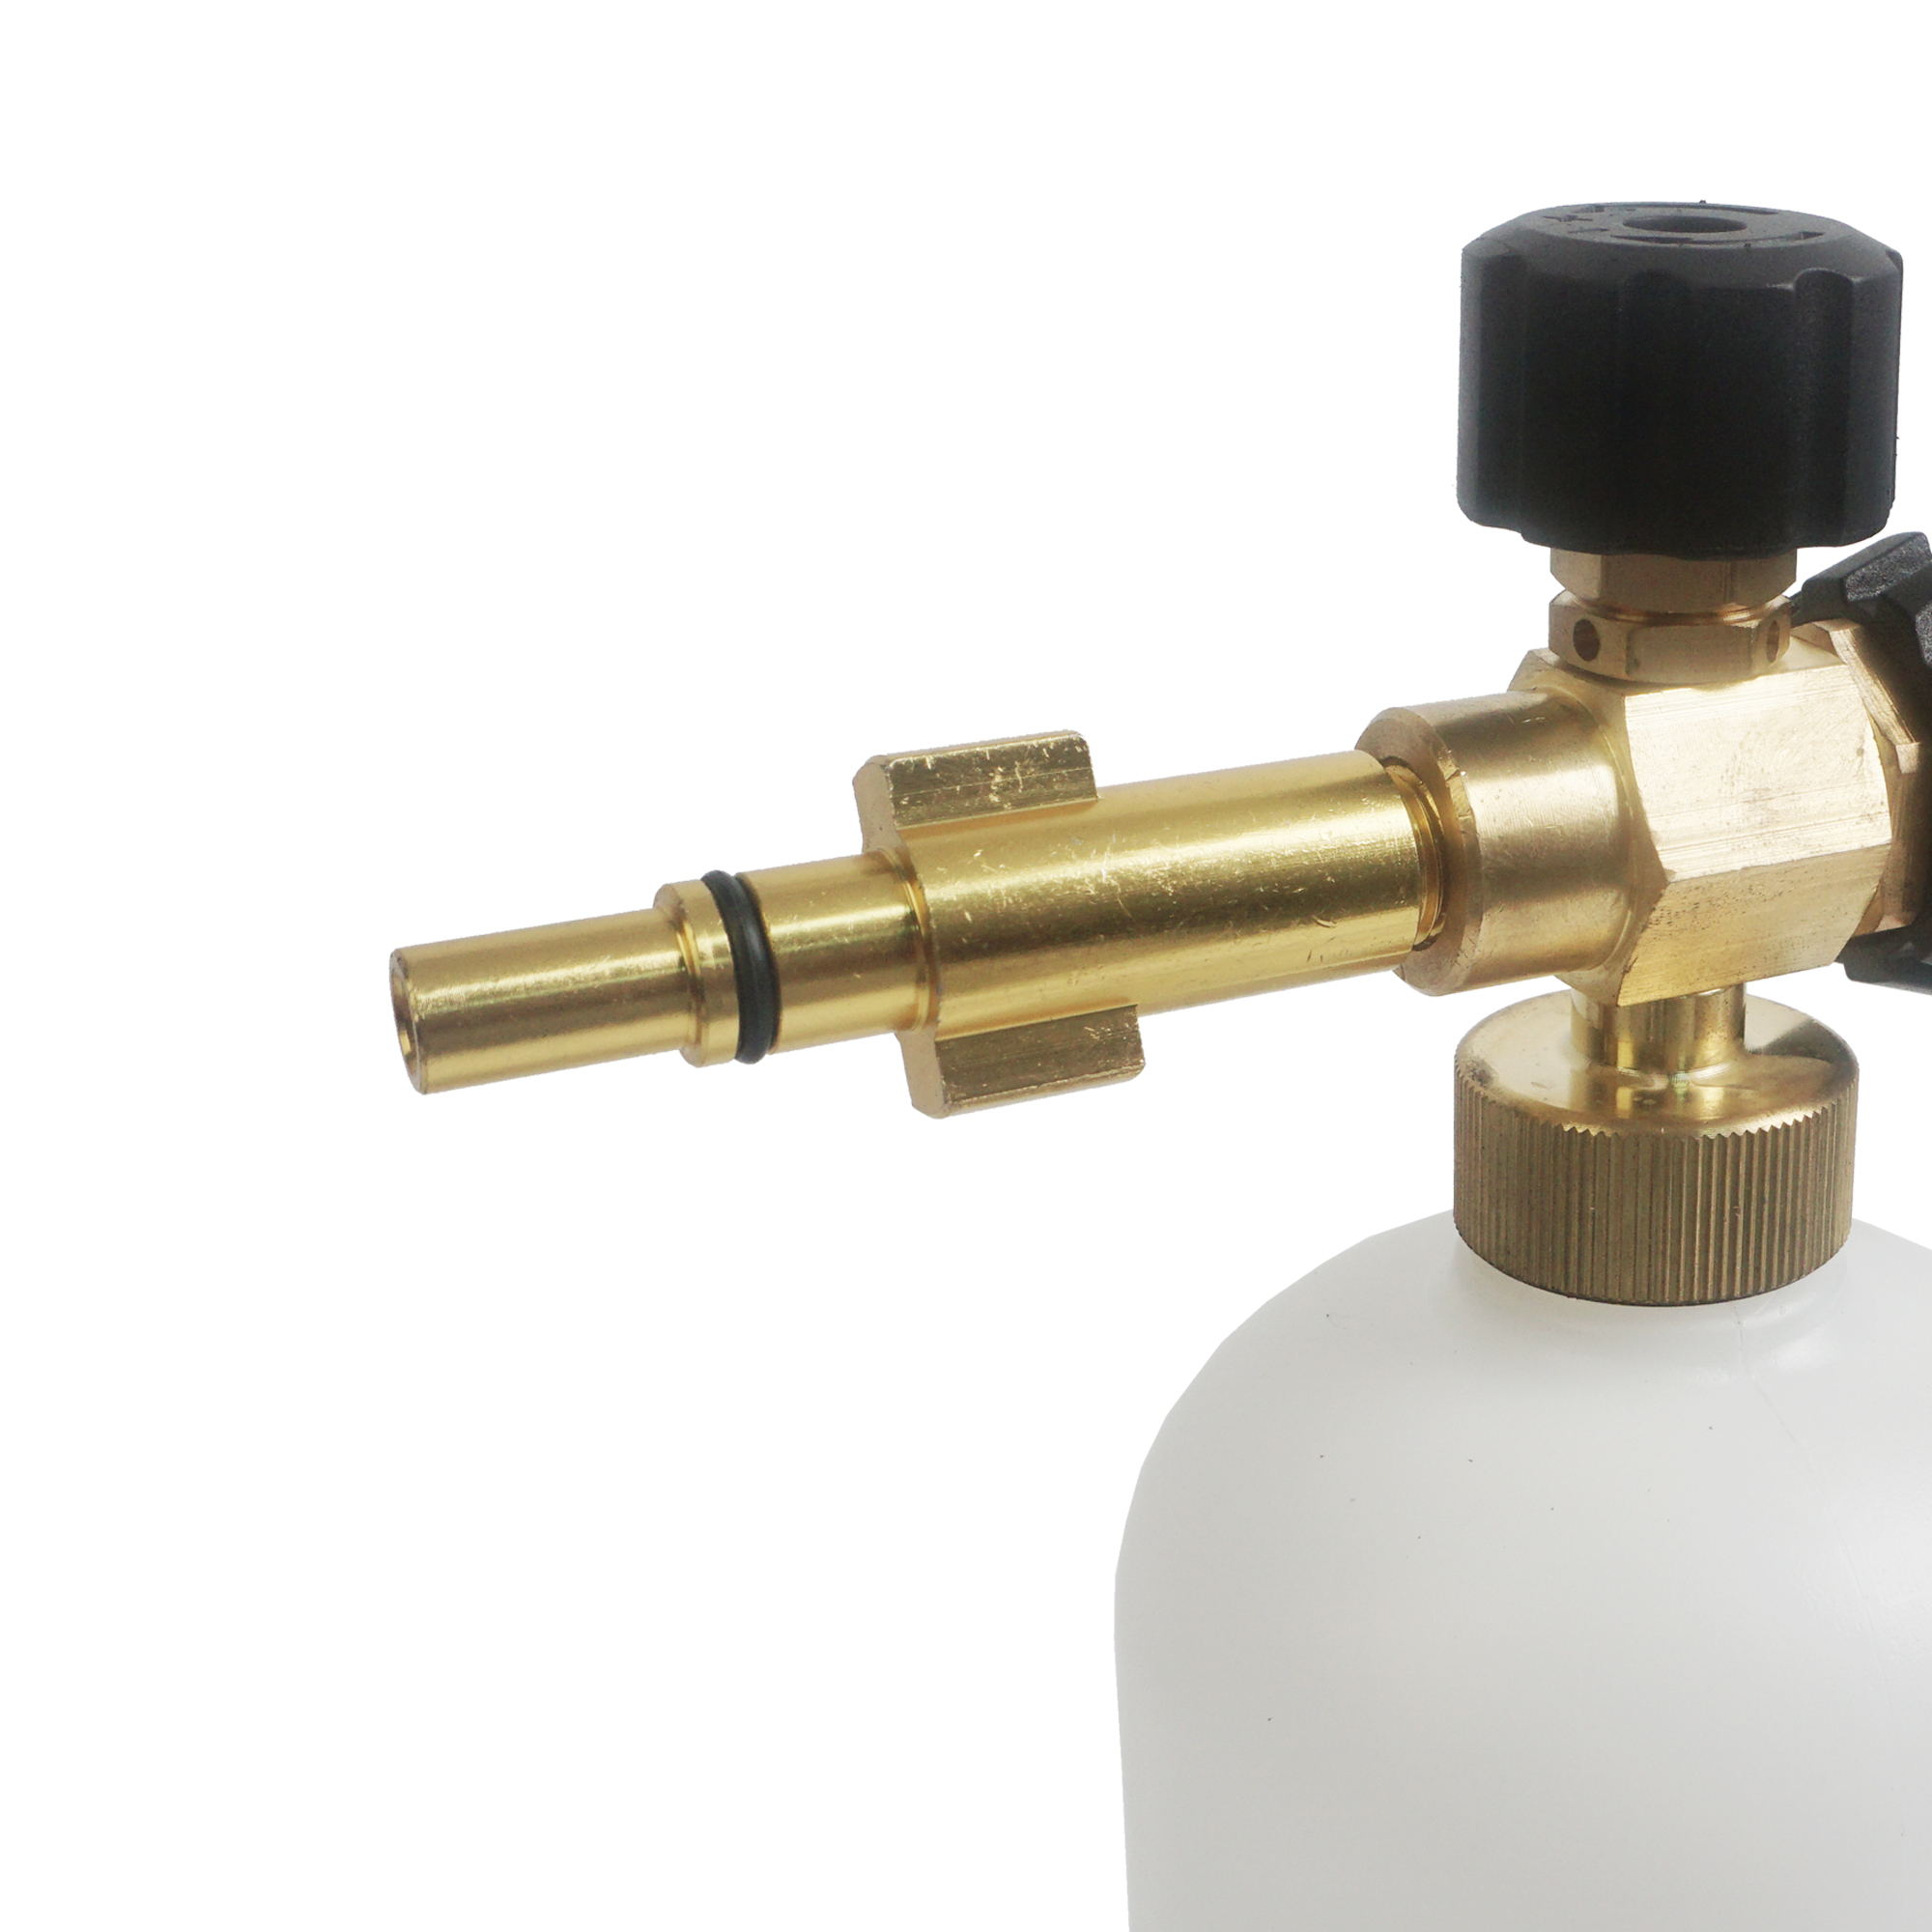 High Quality Pressure Washer Quick Connector to Spray Gun Wand Lance Adapter quick disconnect release fitting